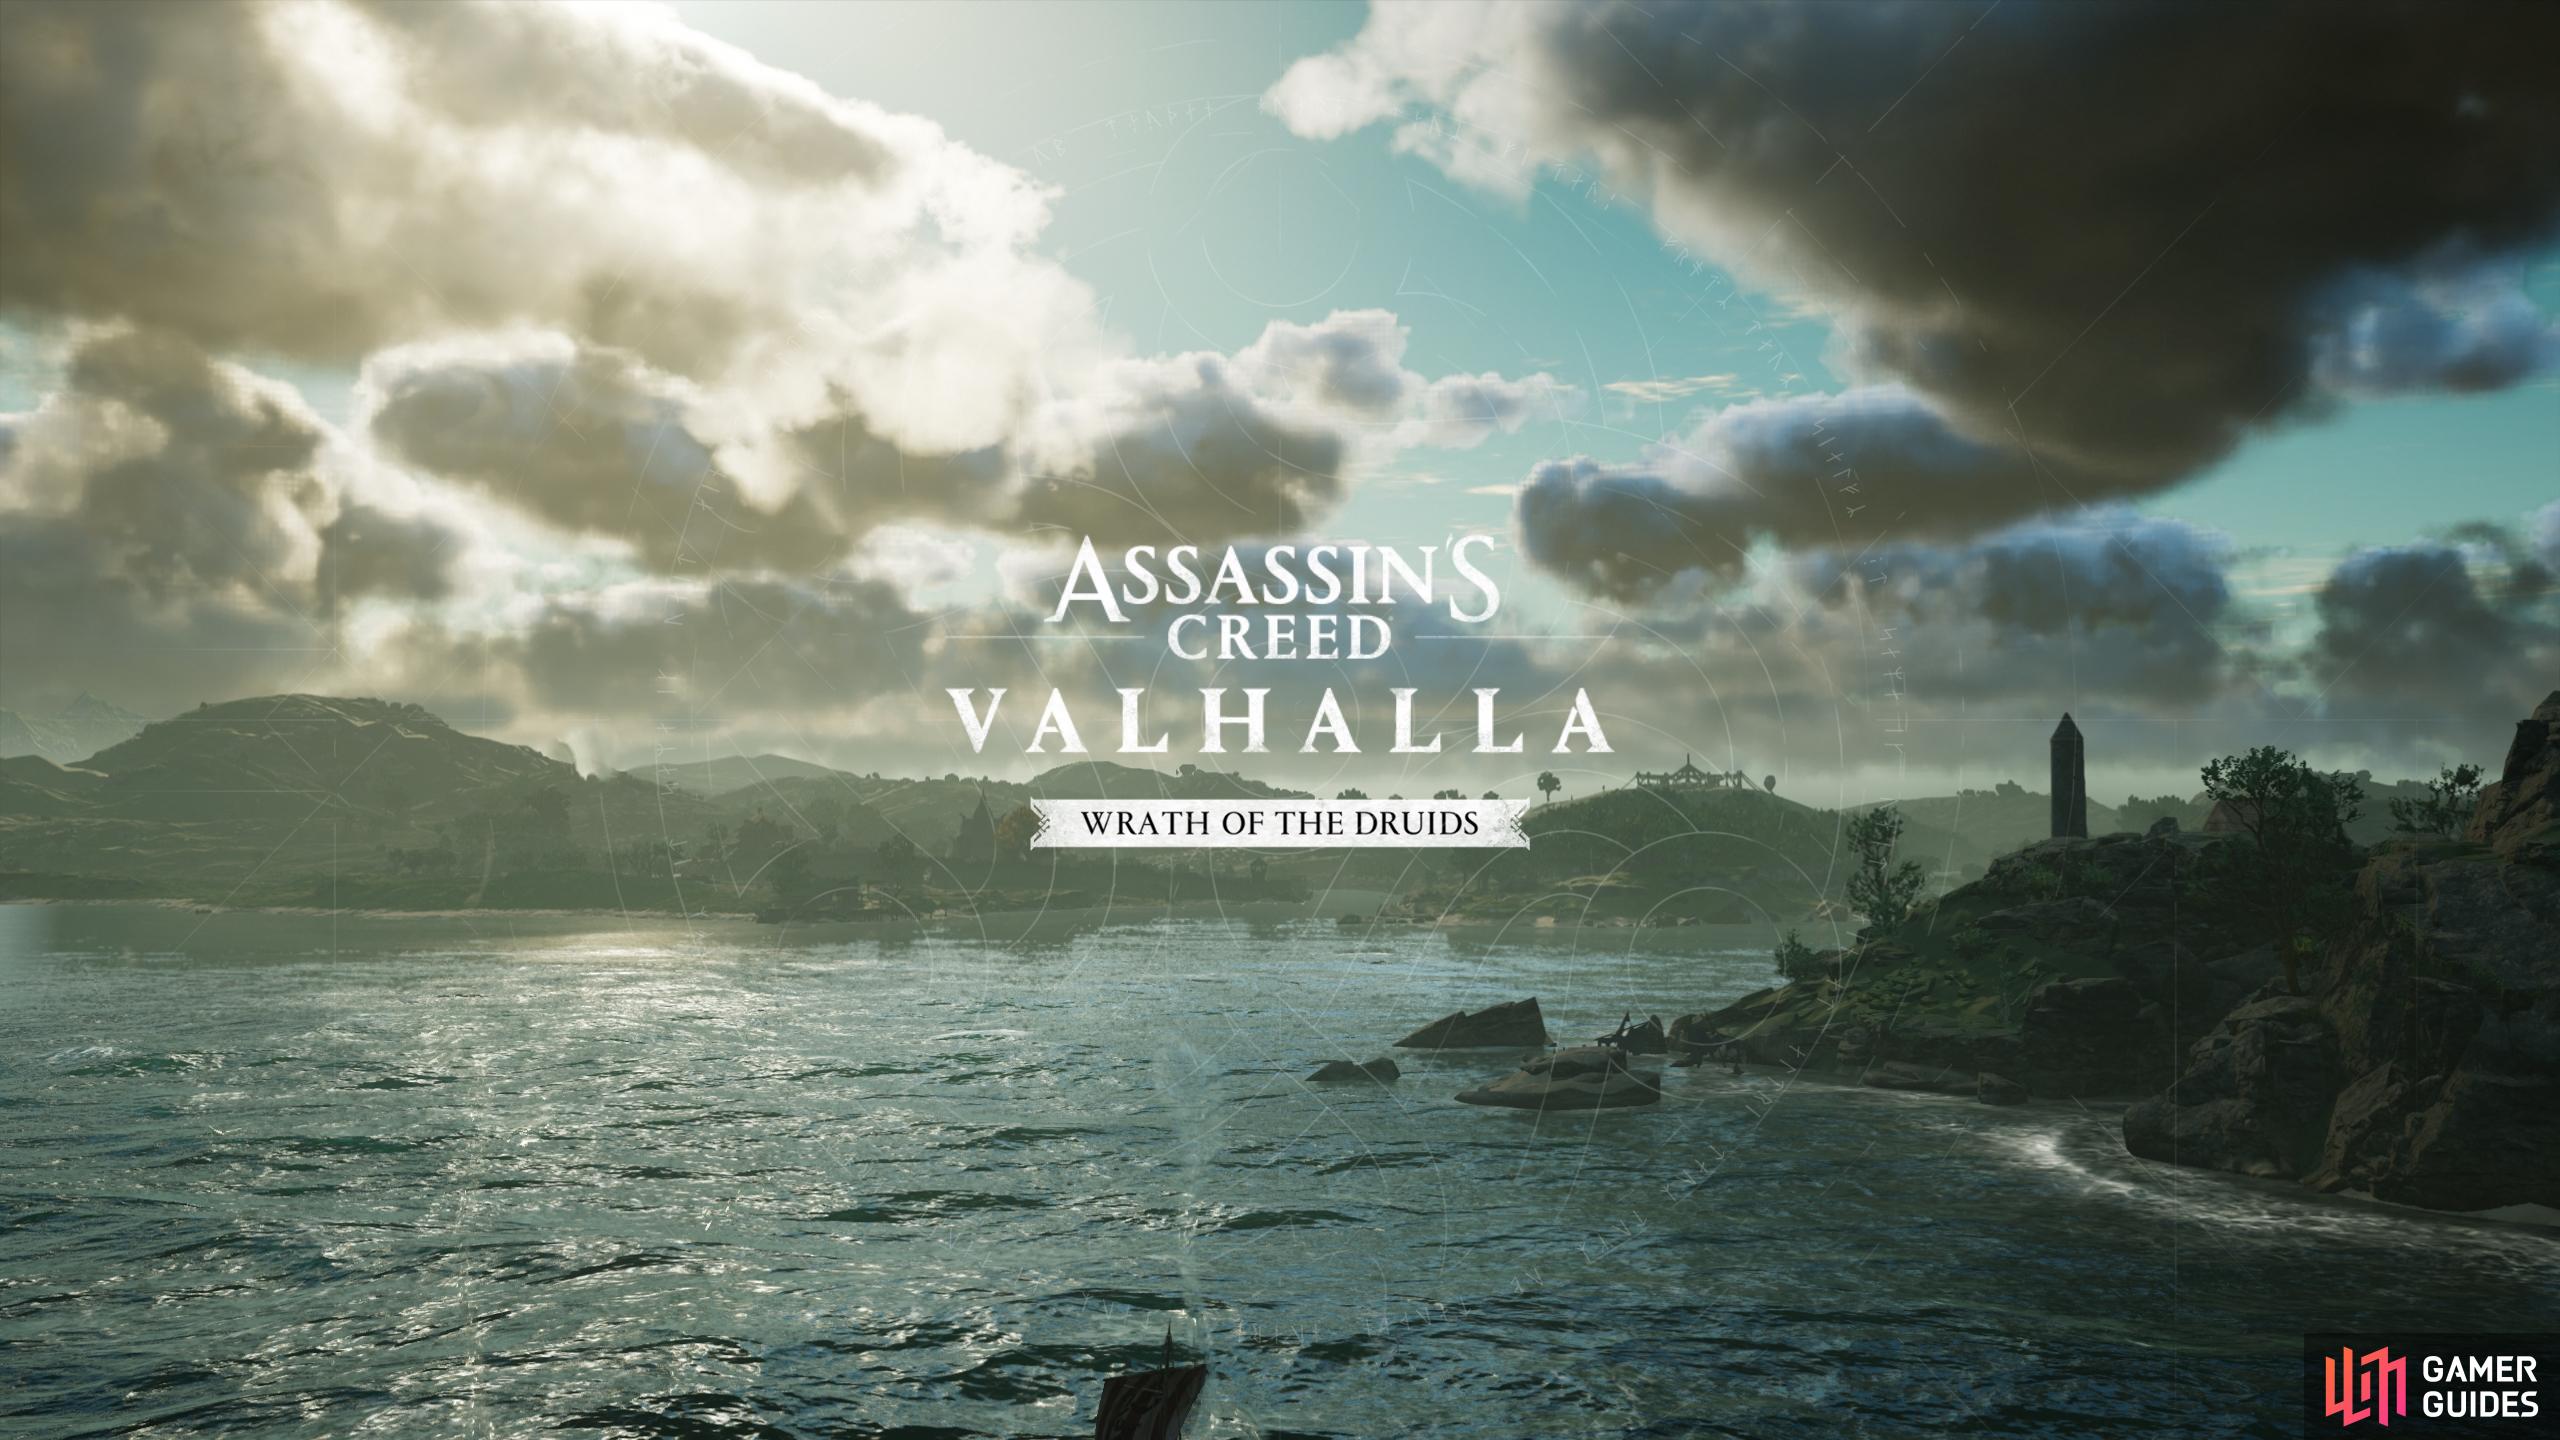 Assassin's Creed: Valhalla, Wrath of the Druids DLC.